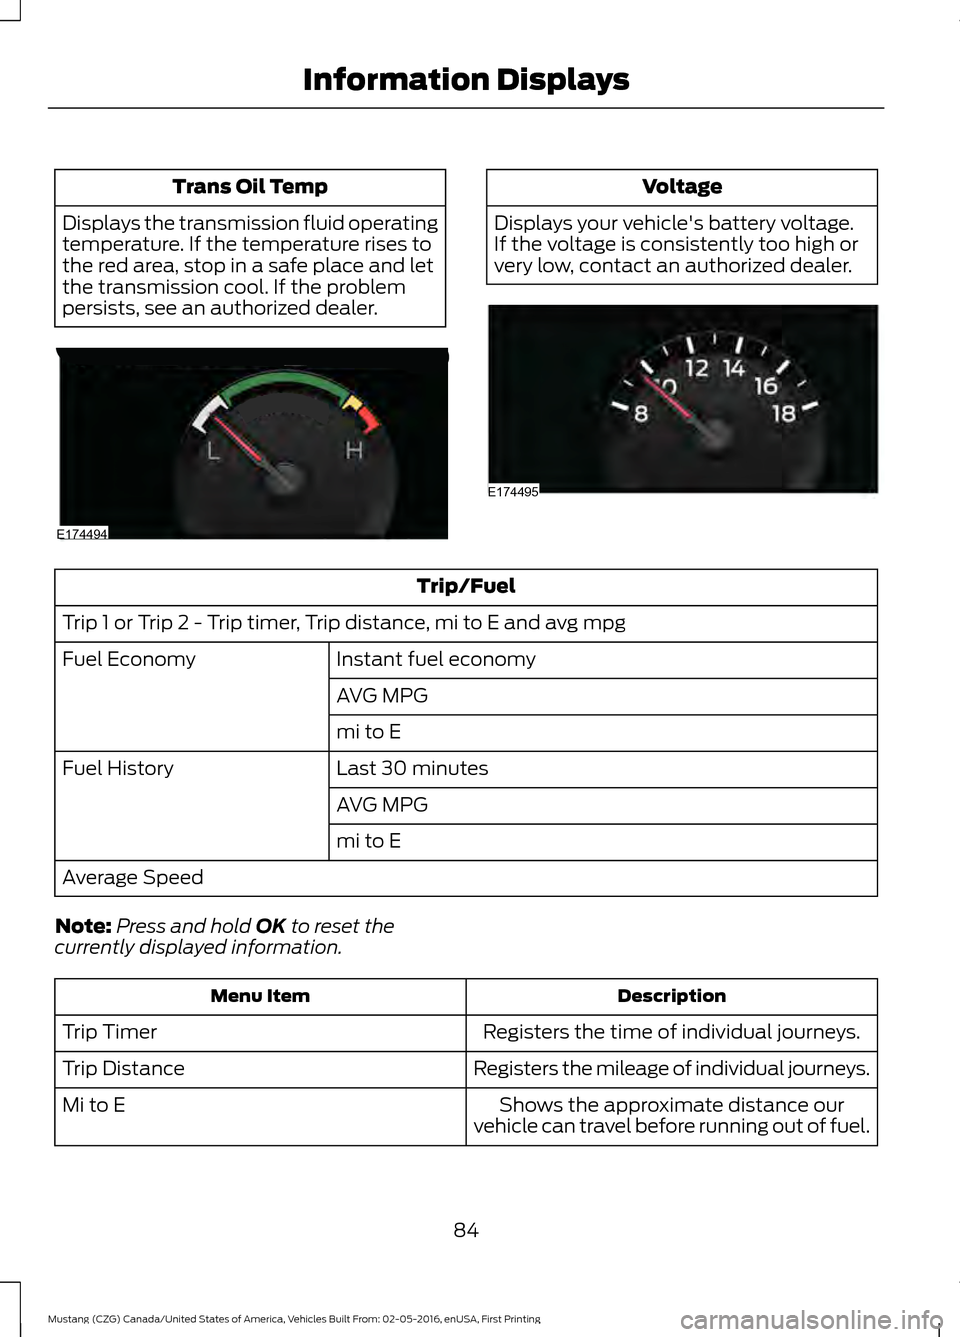 FORD MUSTANG 2017 6.G Owners Manual Trans Oil Temp
Displays the transmission fluid operating
temperature. If the temperature rises to
the red area, stop in a safe place and let
the transmission cool. If the problem
persists, see an auth